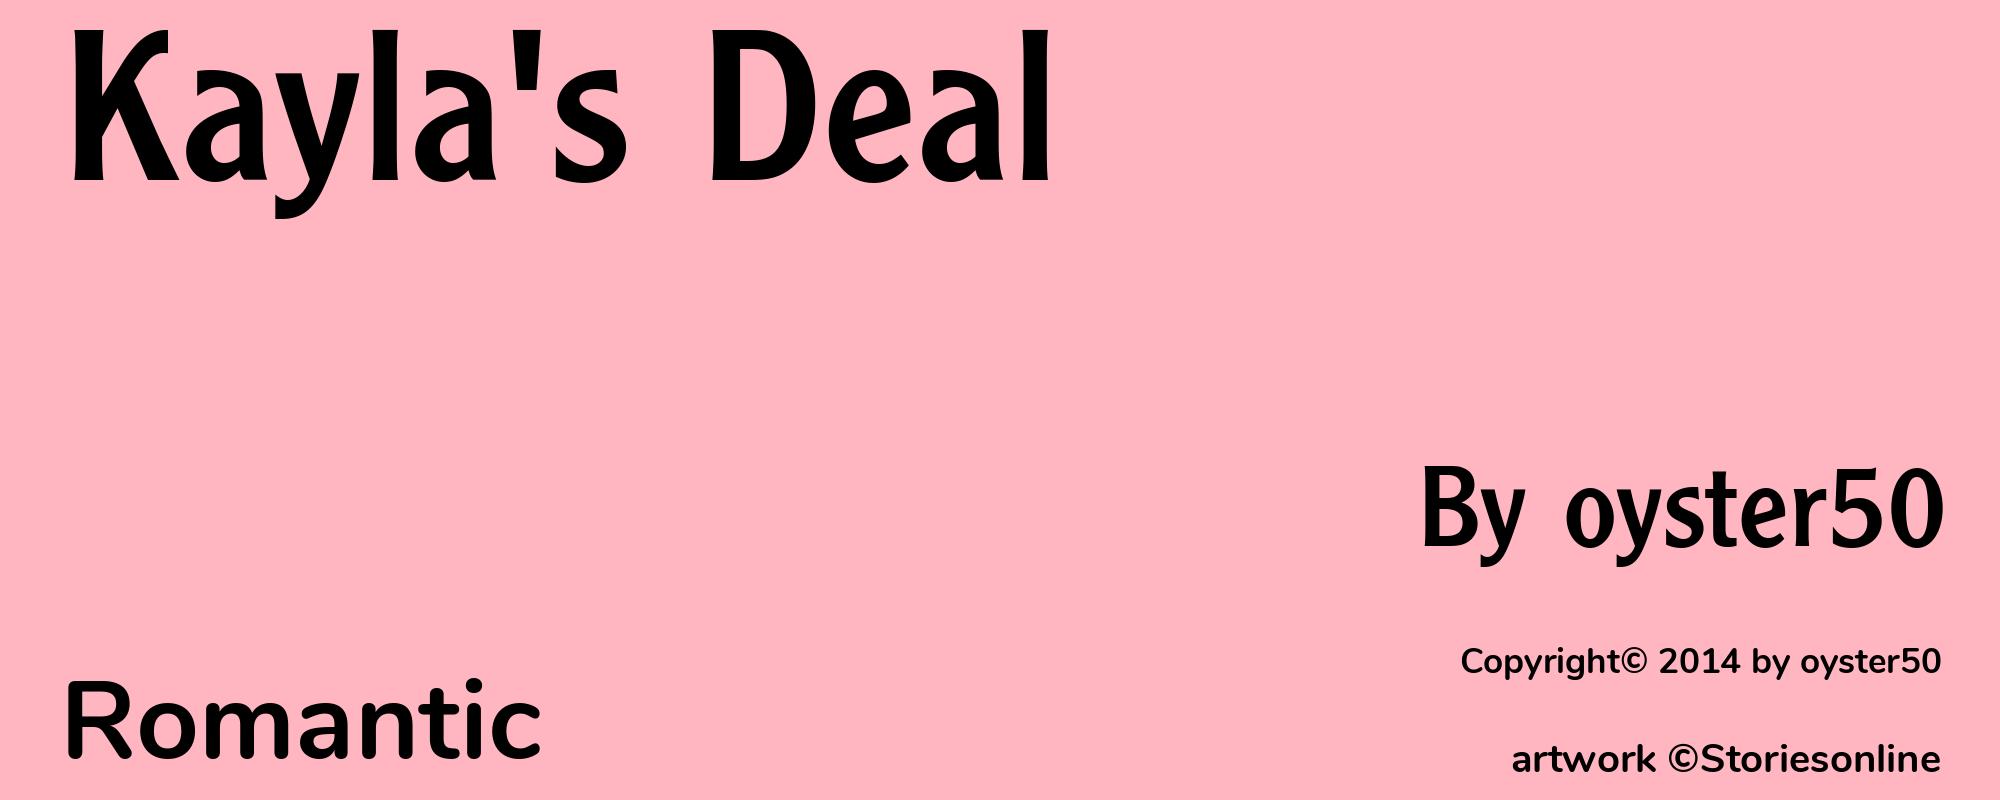 Kayla's Deal - Cover